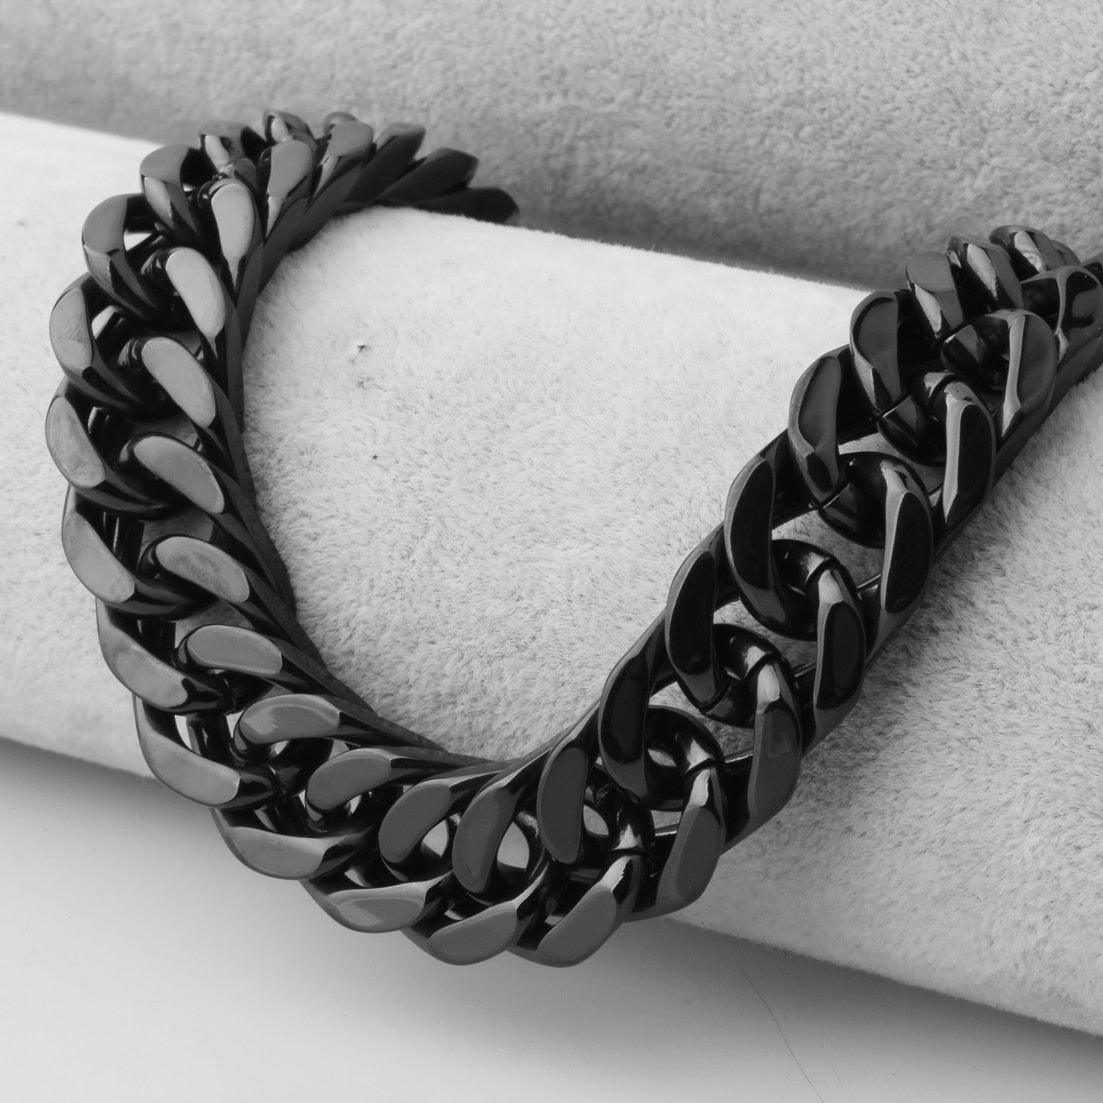 Men's Jewelry - Necklaces Stainless Steel Black Cuban Link Chain Necklace For Men